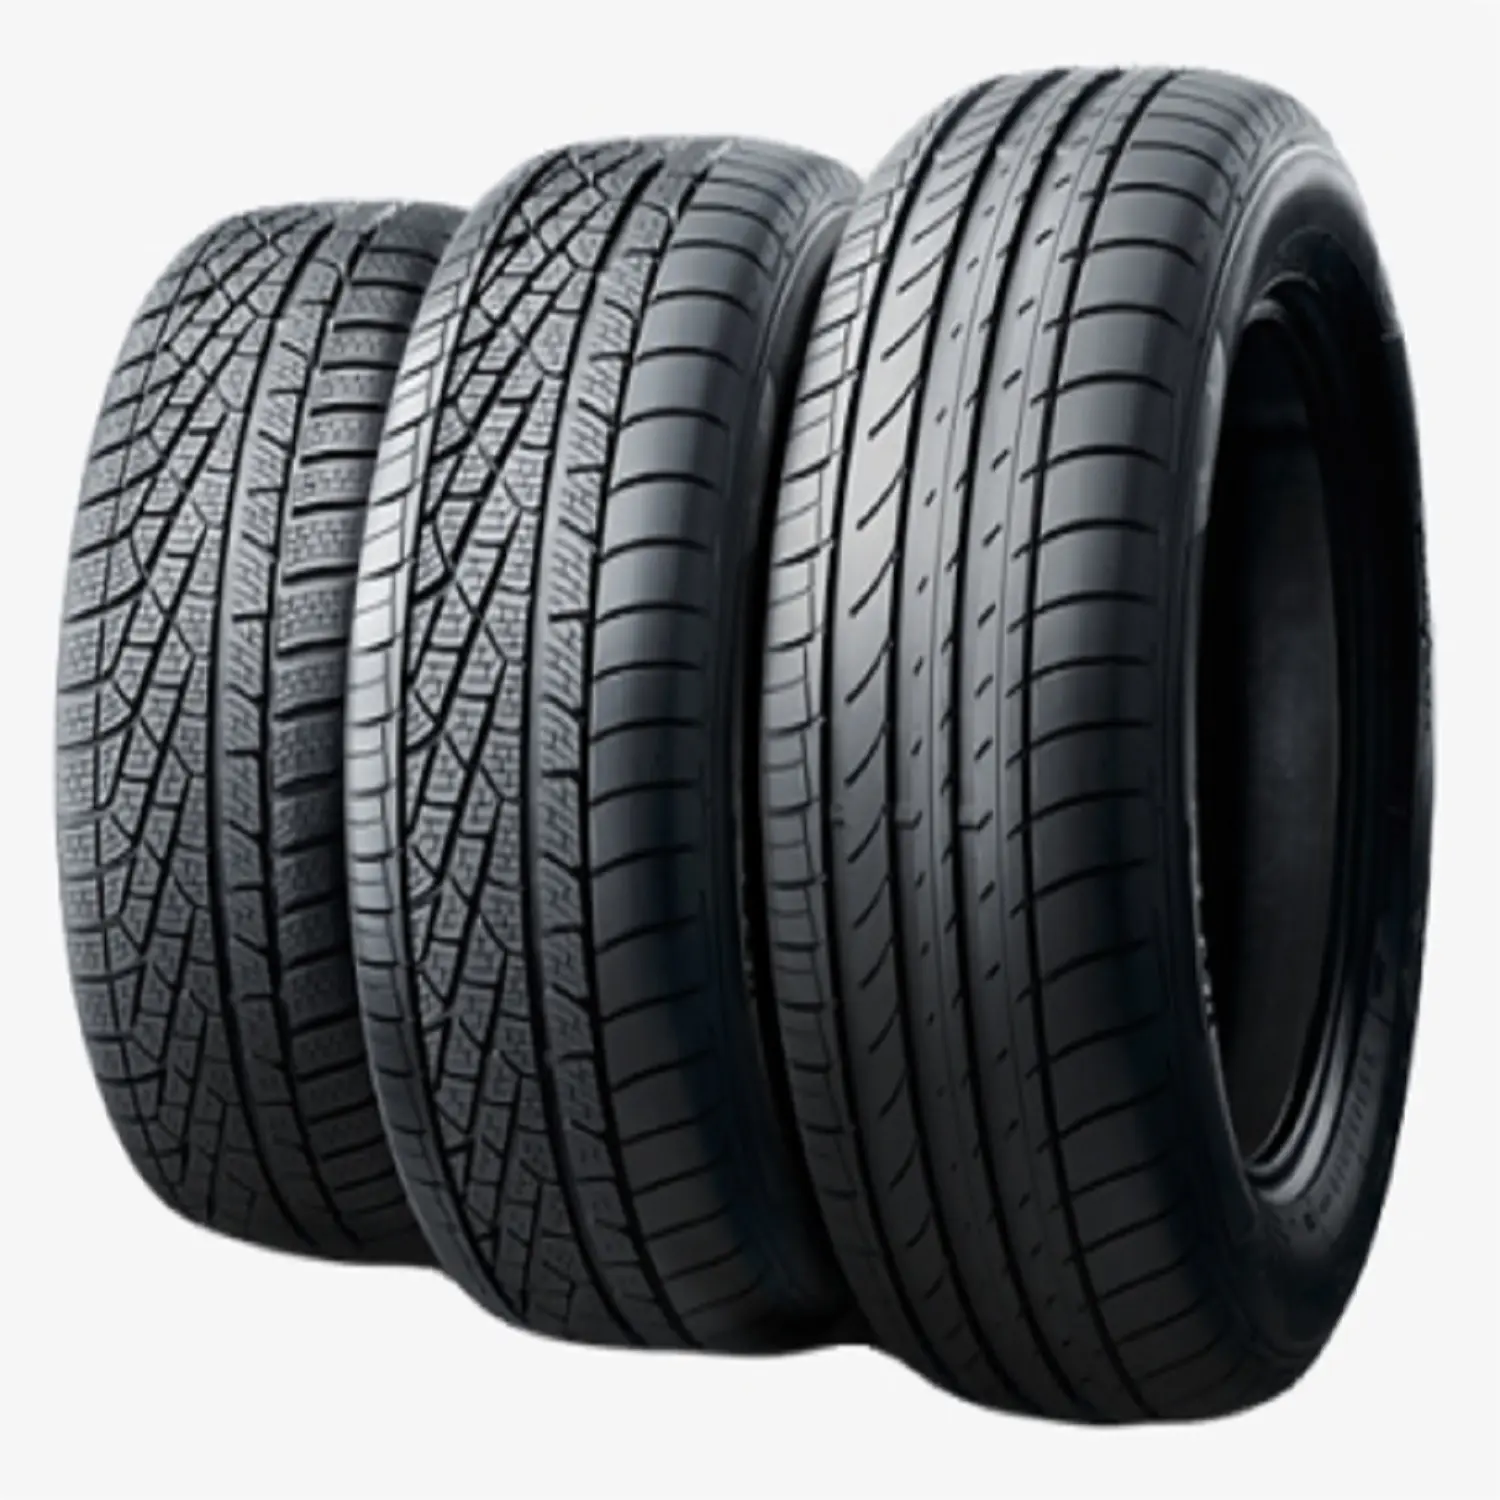 Super Wholesale Scrap Tires used tyers used car tires to 300 Metric Tons per Month